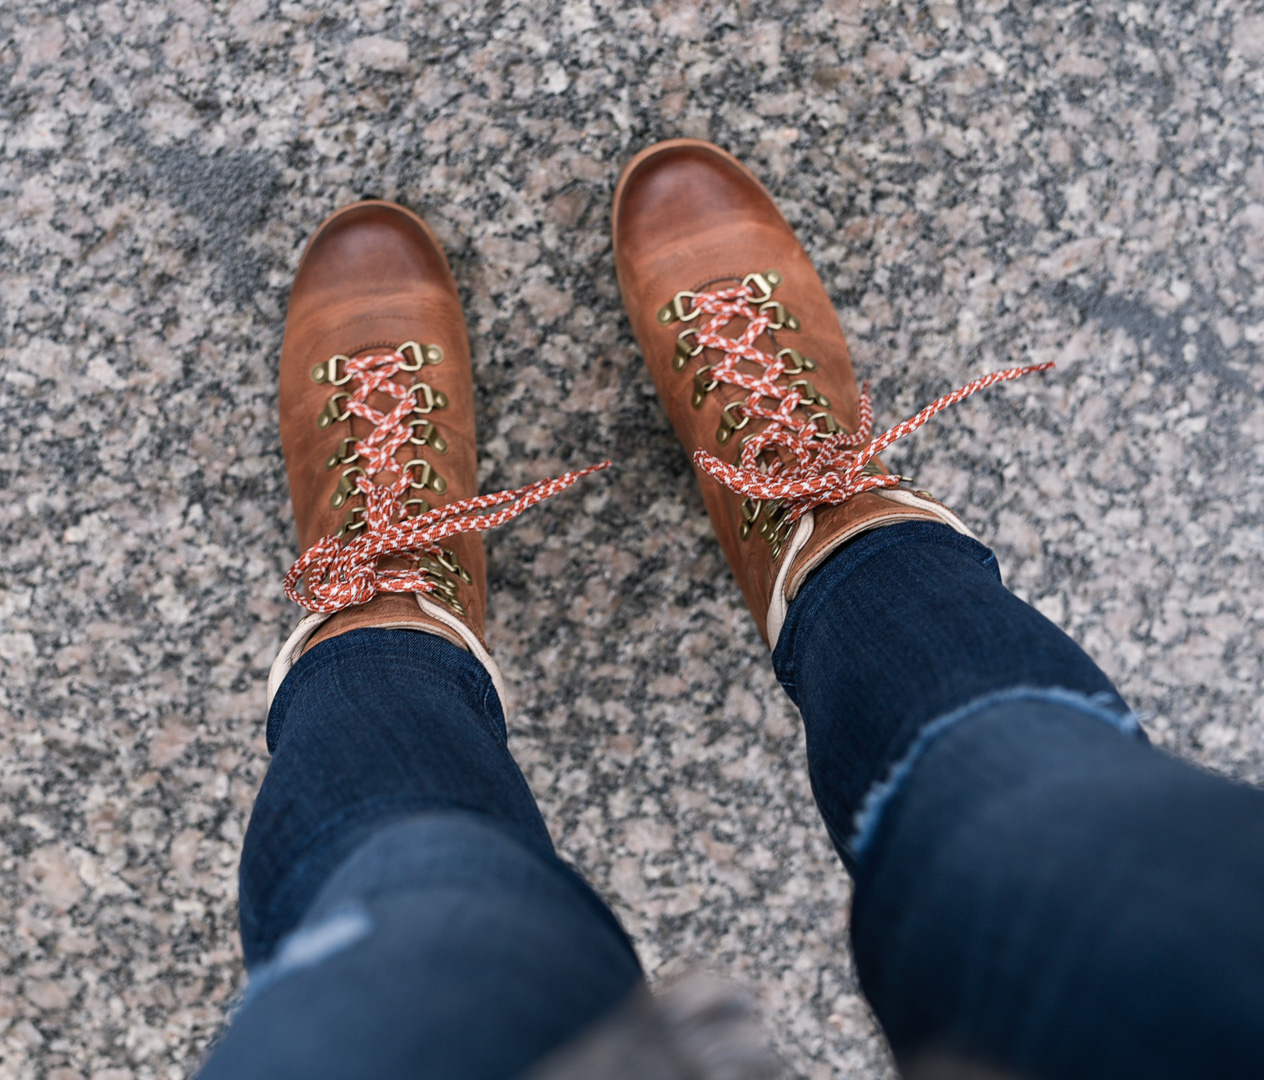 Jenna Colgrove wearing the SOREL Conquest Wedge from Zappos. 